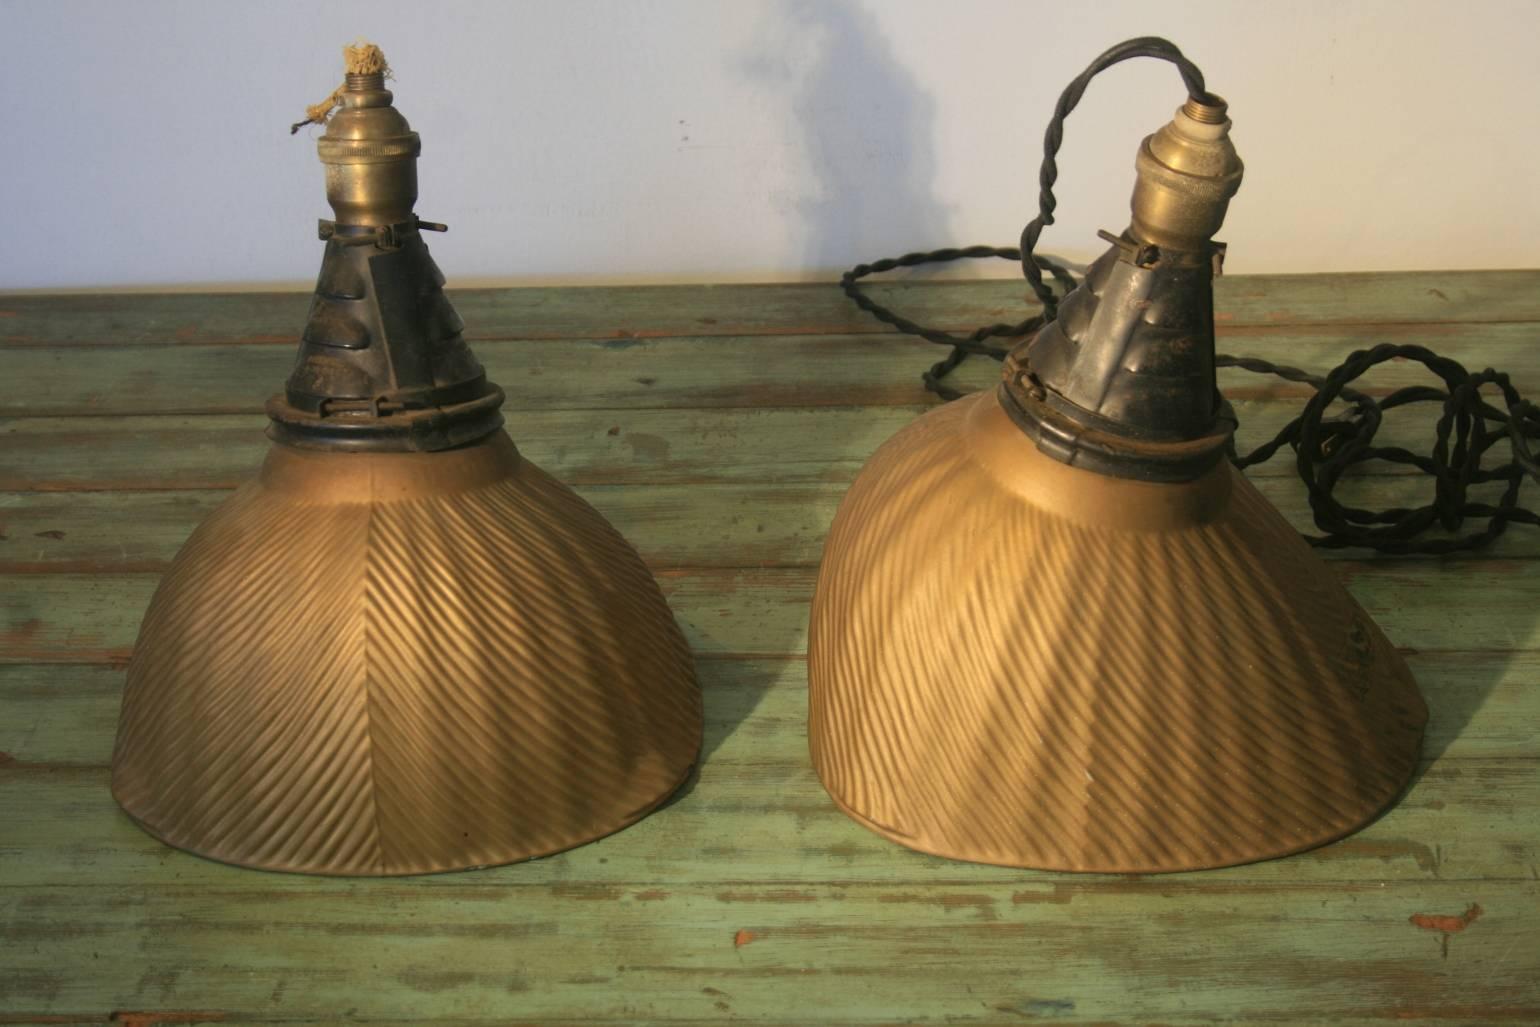 Six Mercury glass industrial shades made by the X-Ray Co. They have the original cone shaped black holders and sockets. They are all in excellent condition with no losses to the mercury or gold painted exteriors. They are beautiful as objects and